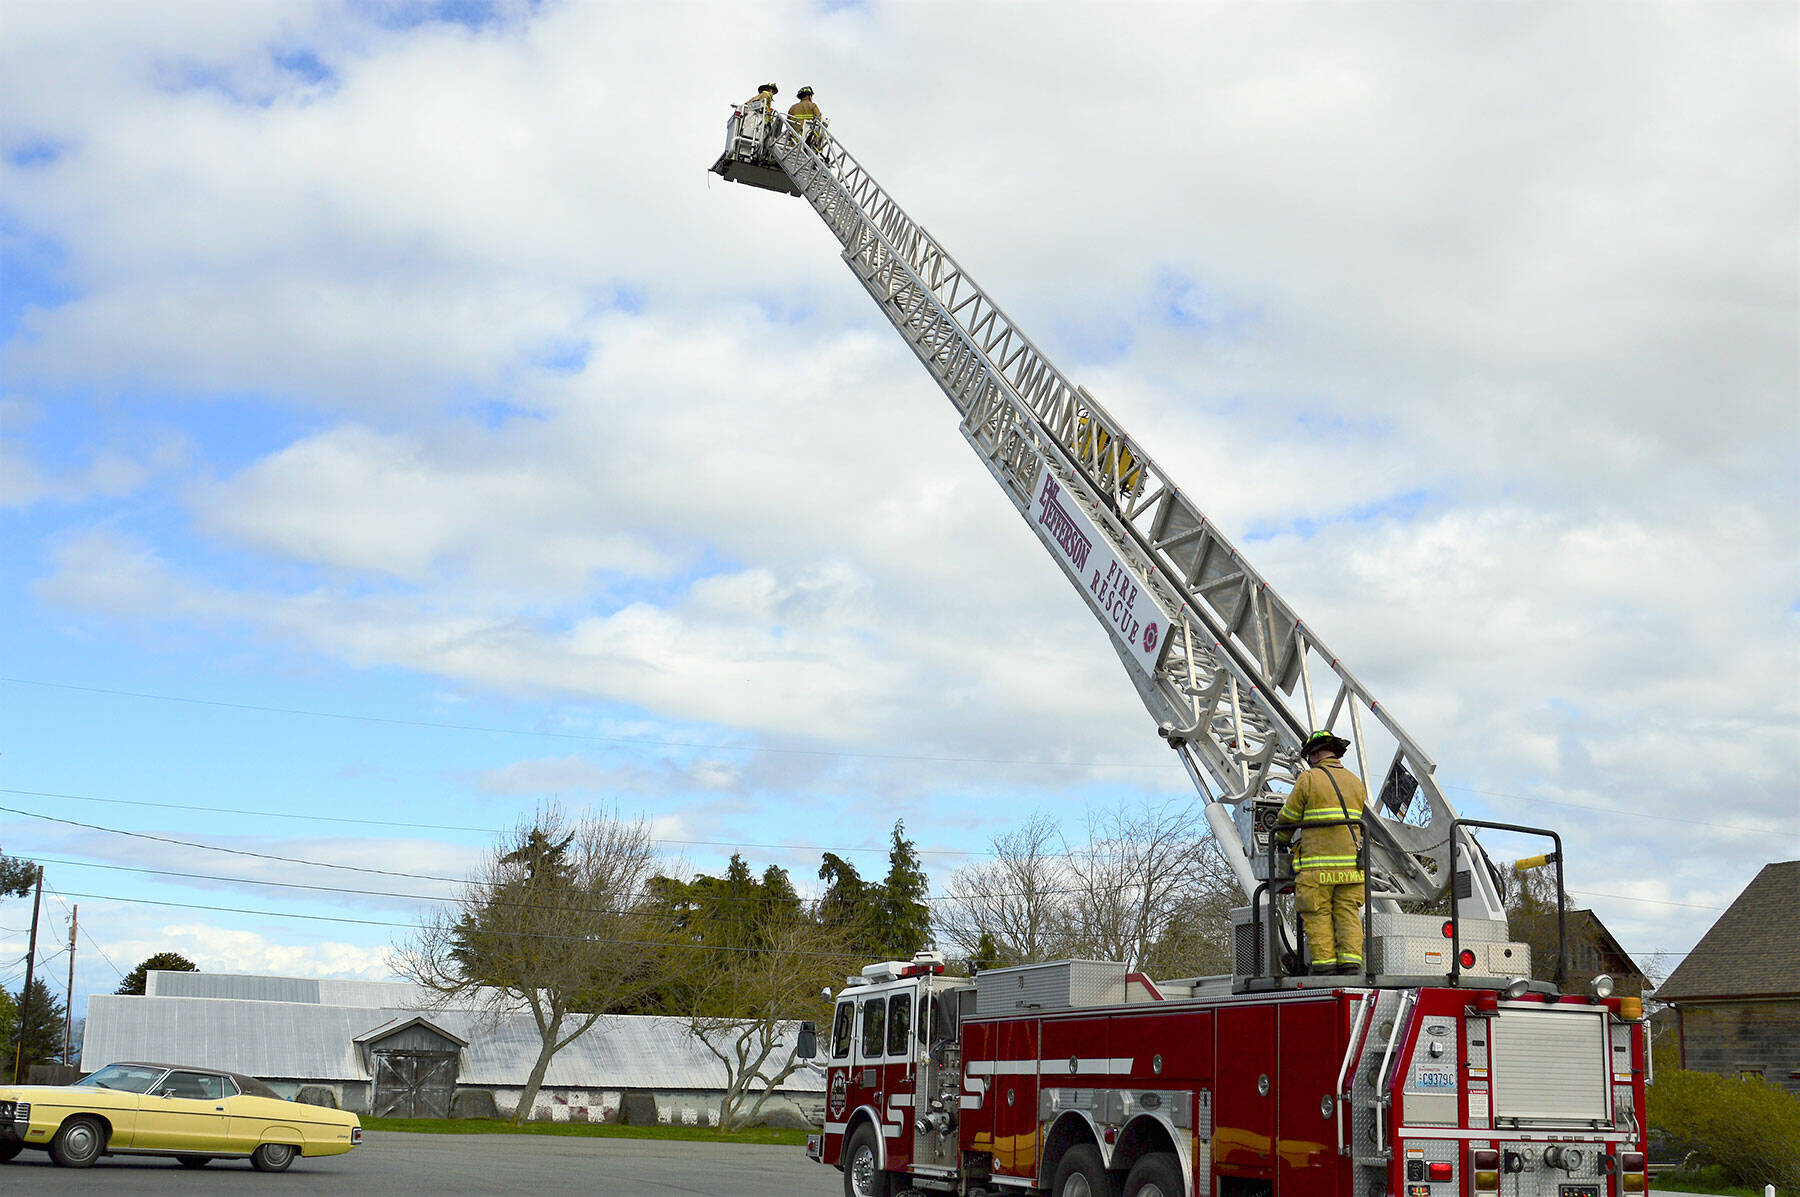 In the bucket of East Jefferson Fire Rescue’s new ladder truck, firefighters Matt Sheehan, left, and Ben Richter demonstrate extension of the 95-foot ladder, along with firefighter Andy Dalrymple at the base. (Diane Urbani de la Paz/Peninsula Daily News)